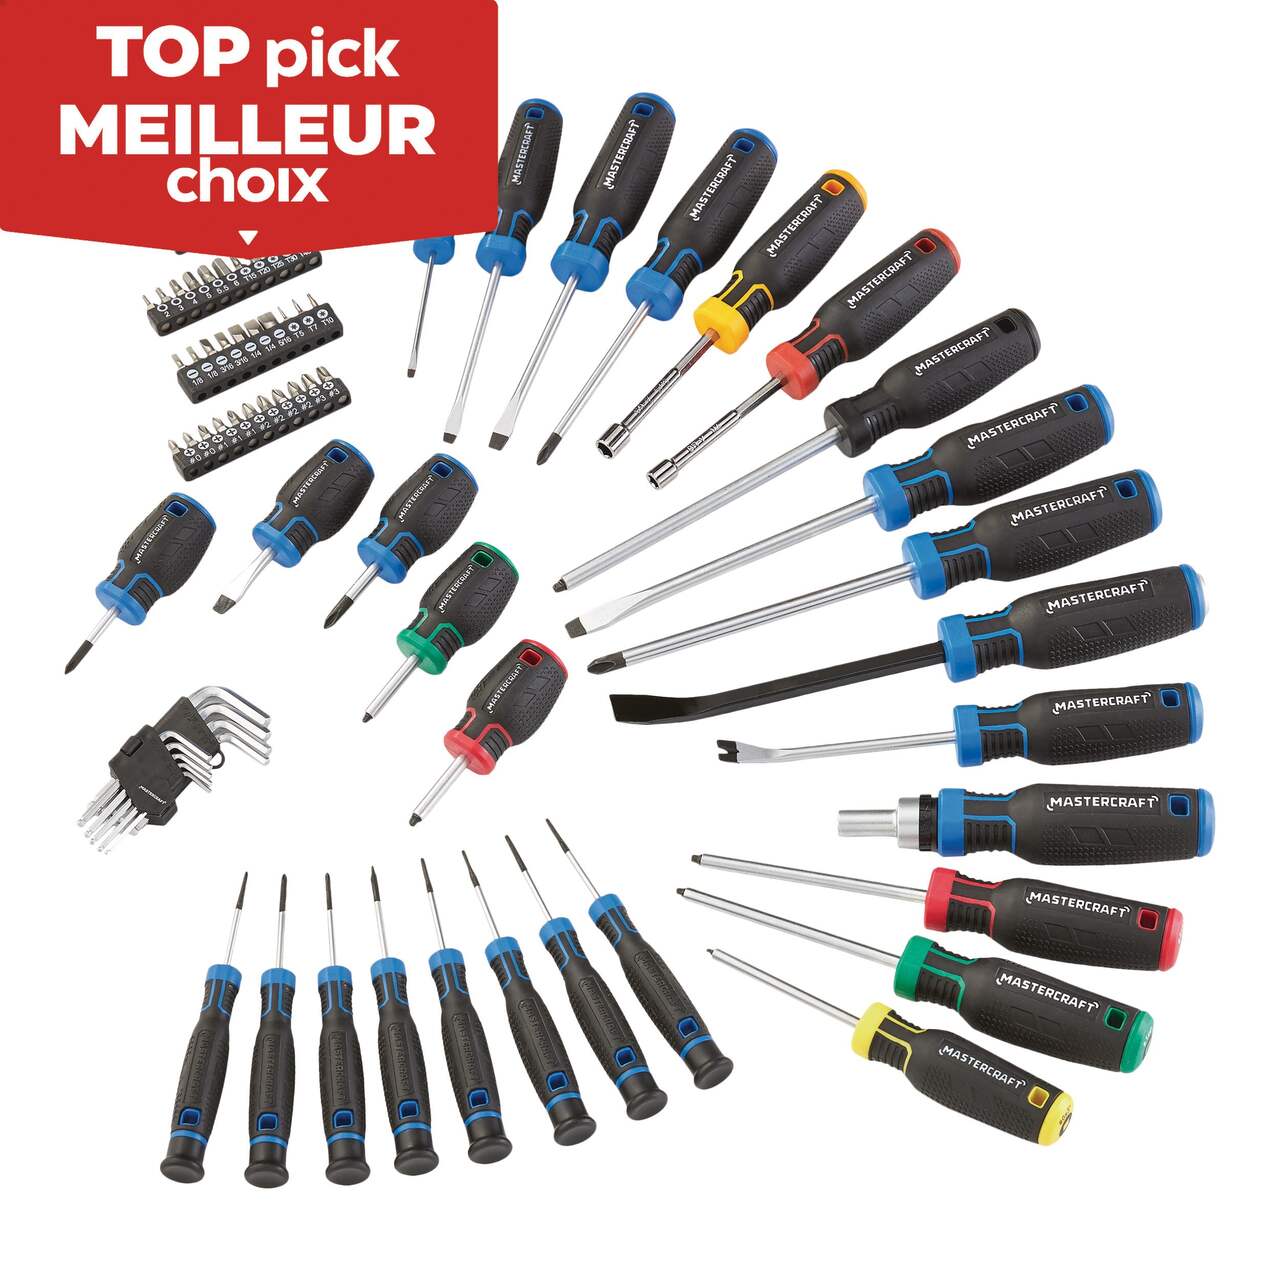 https://media-www.canadiantire.ca/product/fixing/tools/manual-fastening/0573664/mastercraft-80pc-screwdriver-set-13b7b214-e3e1-4548-bf9a-7525fbb23220-jpgrendition.jpg?imdensity=1&imwidth=640&impolicy=mZoom